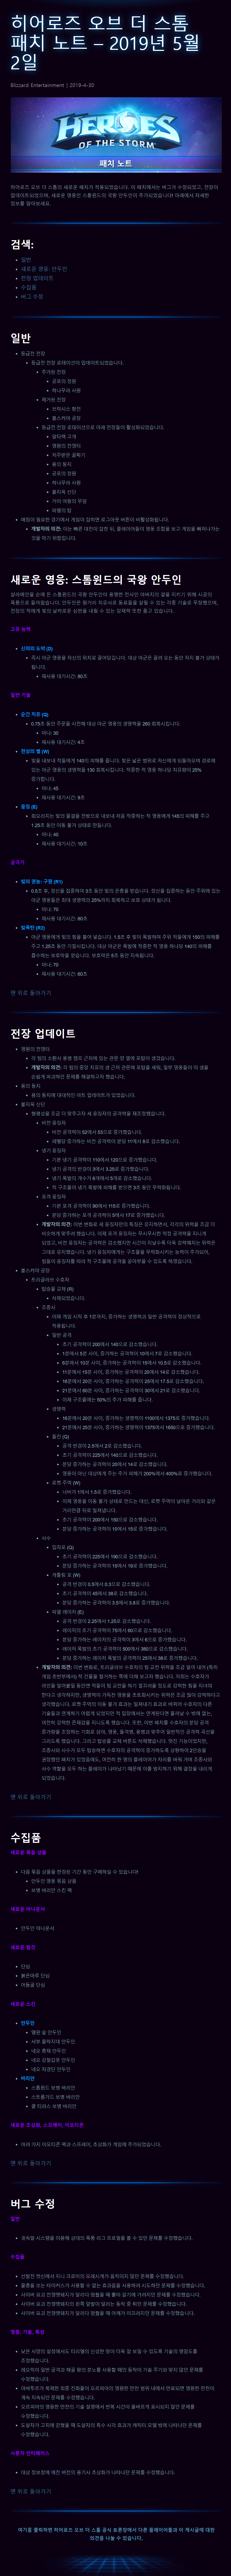 45.0_Patch_Note_KR.png